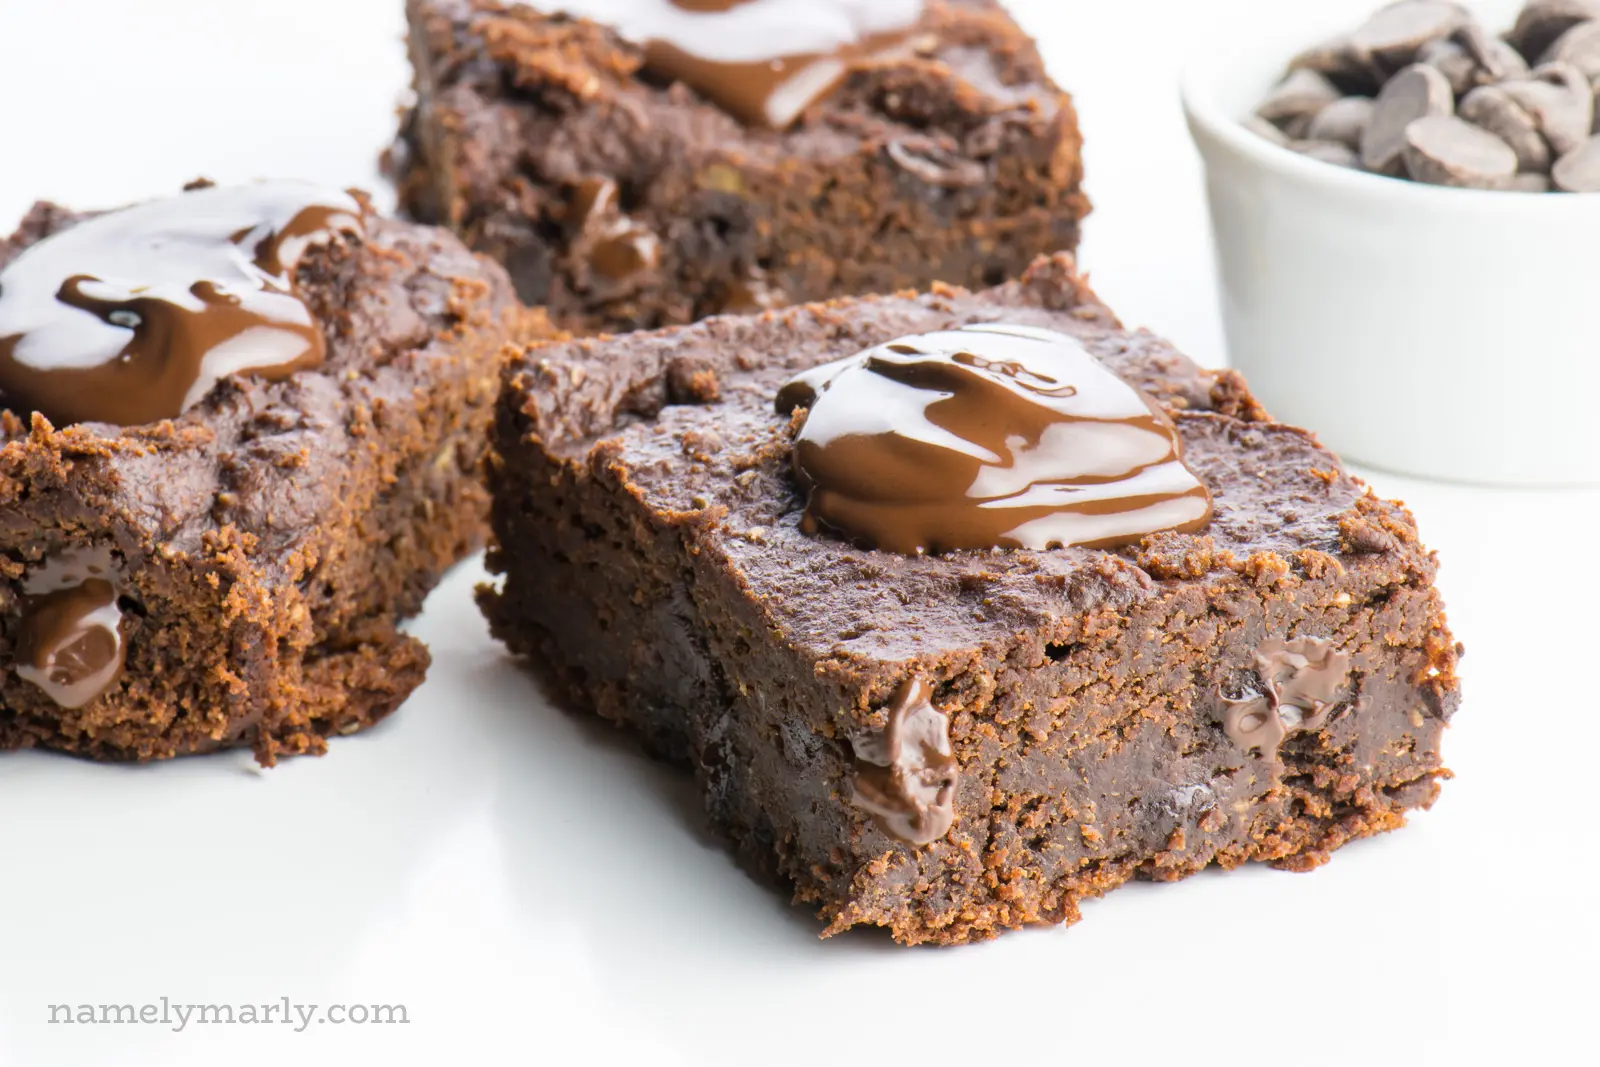 Three slices of chocolate banana brownies sit next to each other, each with a dollop of melted chocolate over the top. A white bowl full of chocolate chips sits nearby.